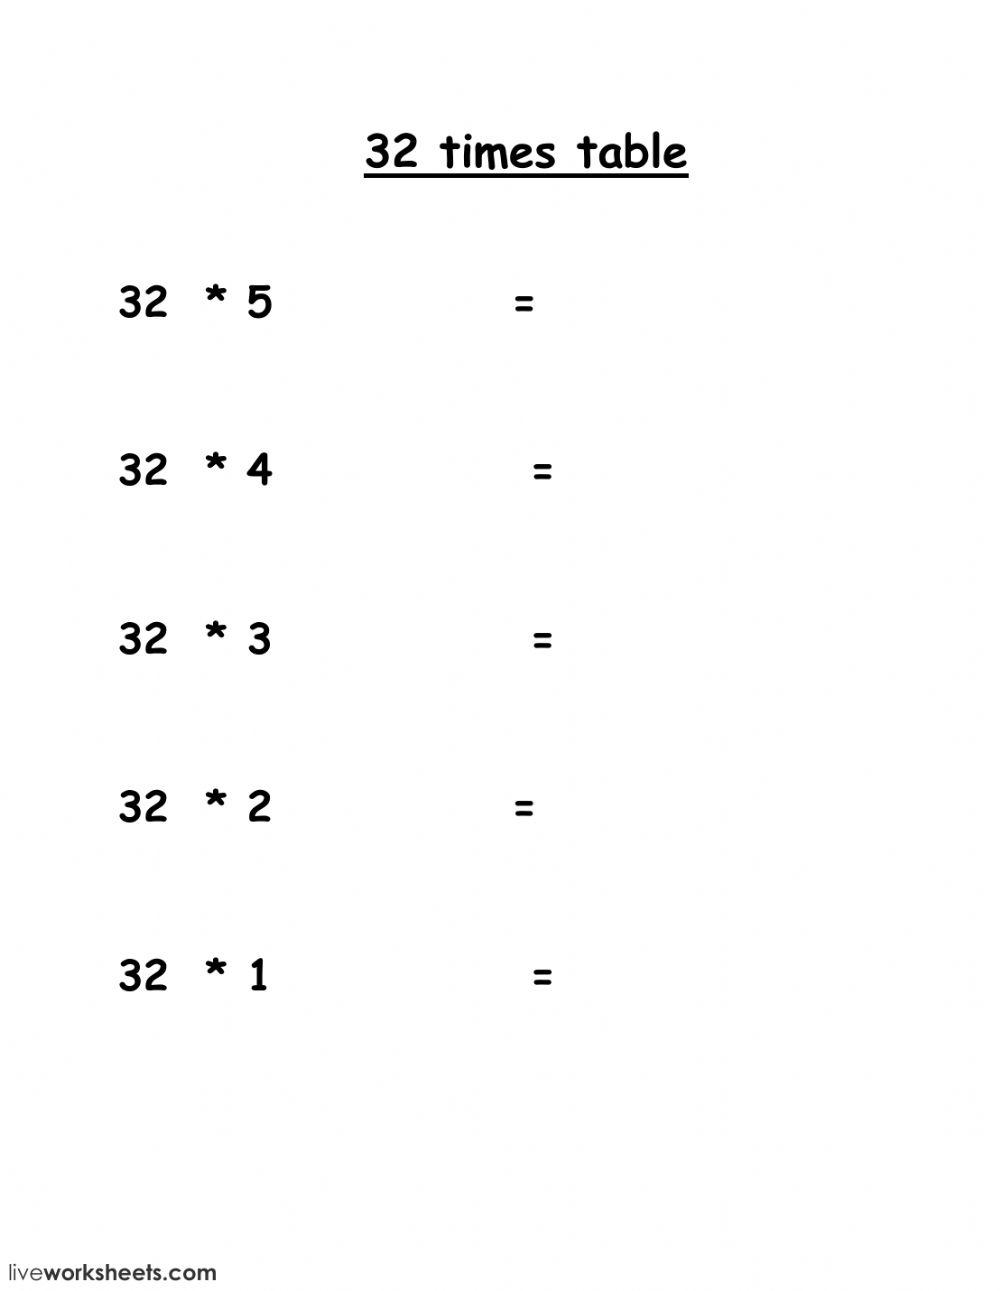 32 times table